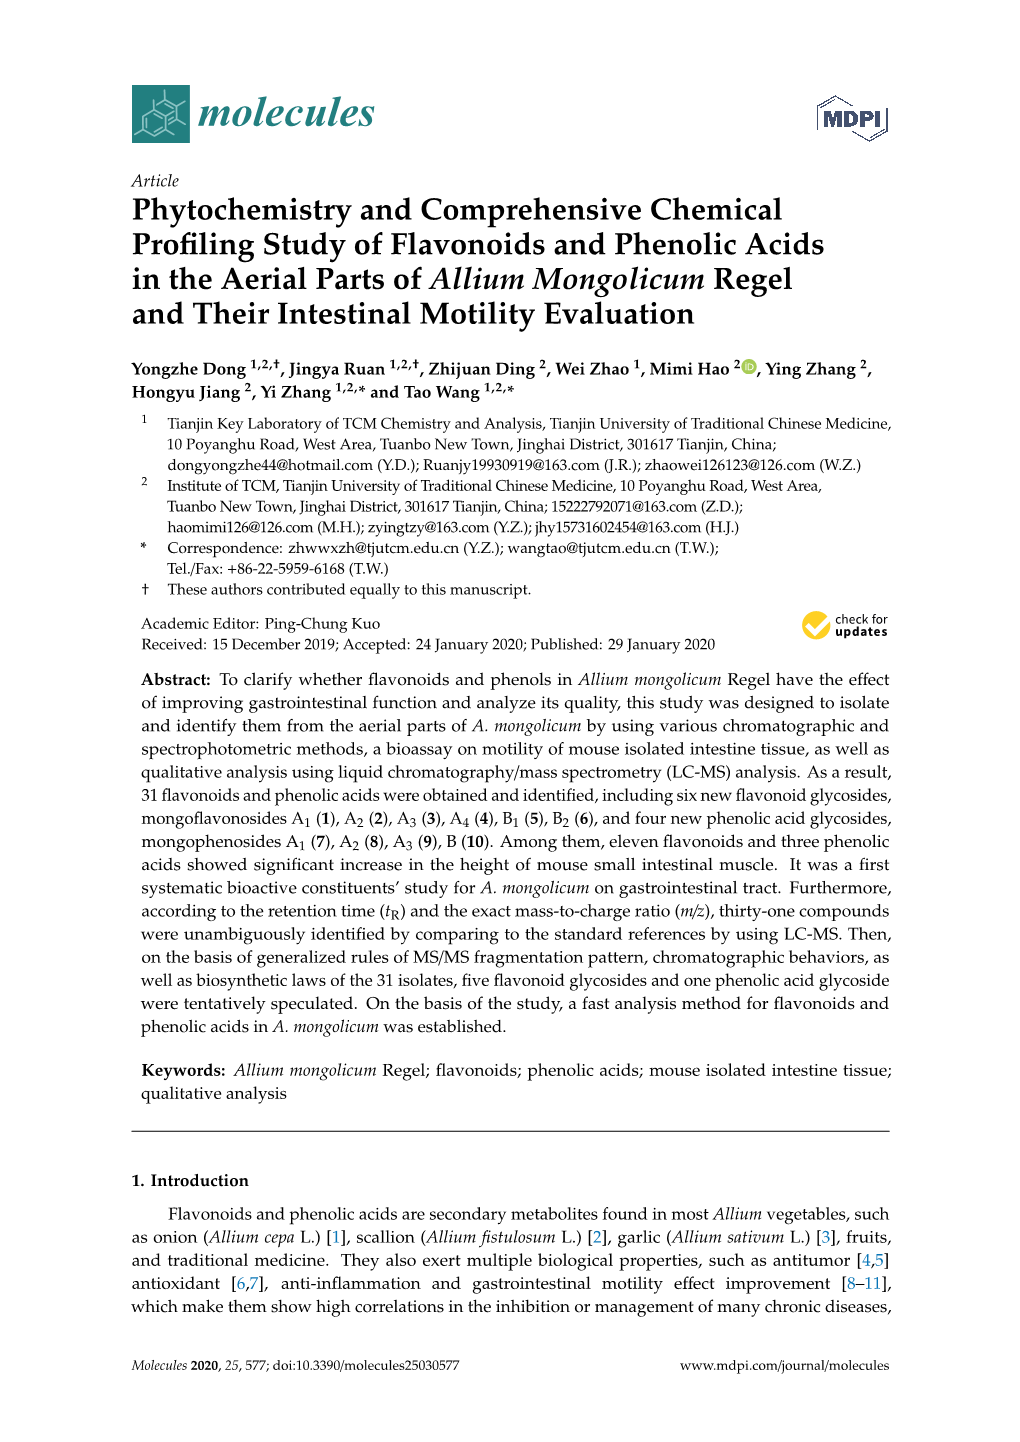 Phytochemistry and Comprehensive Chemical Profiling Study Of